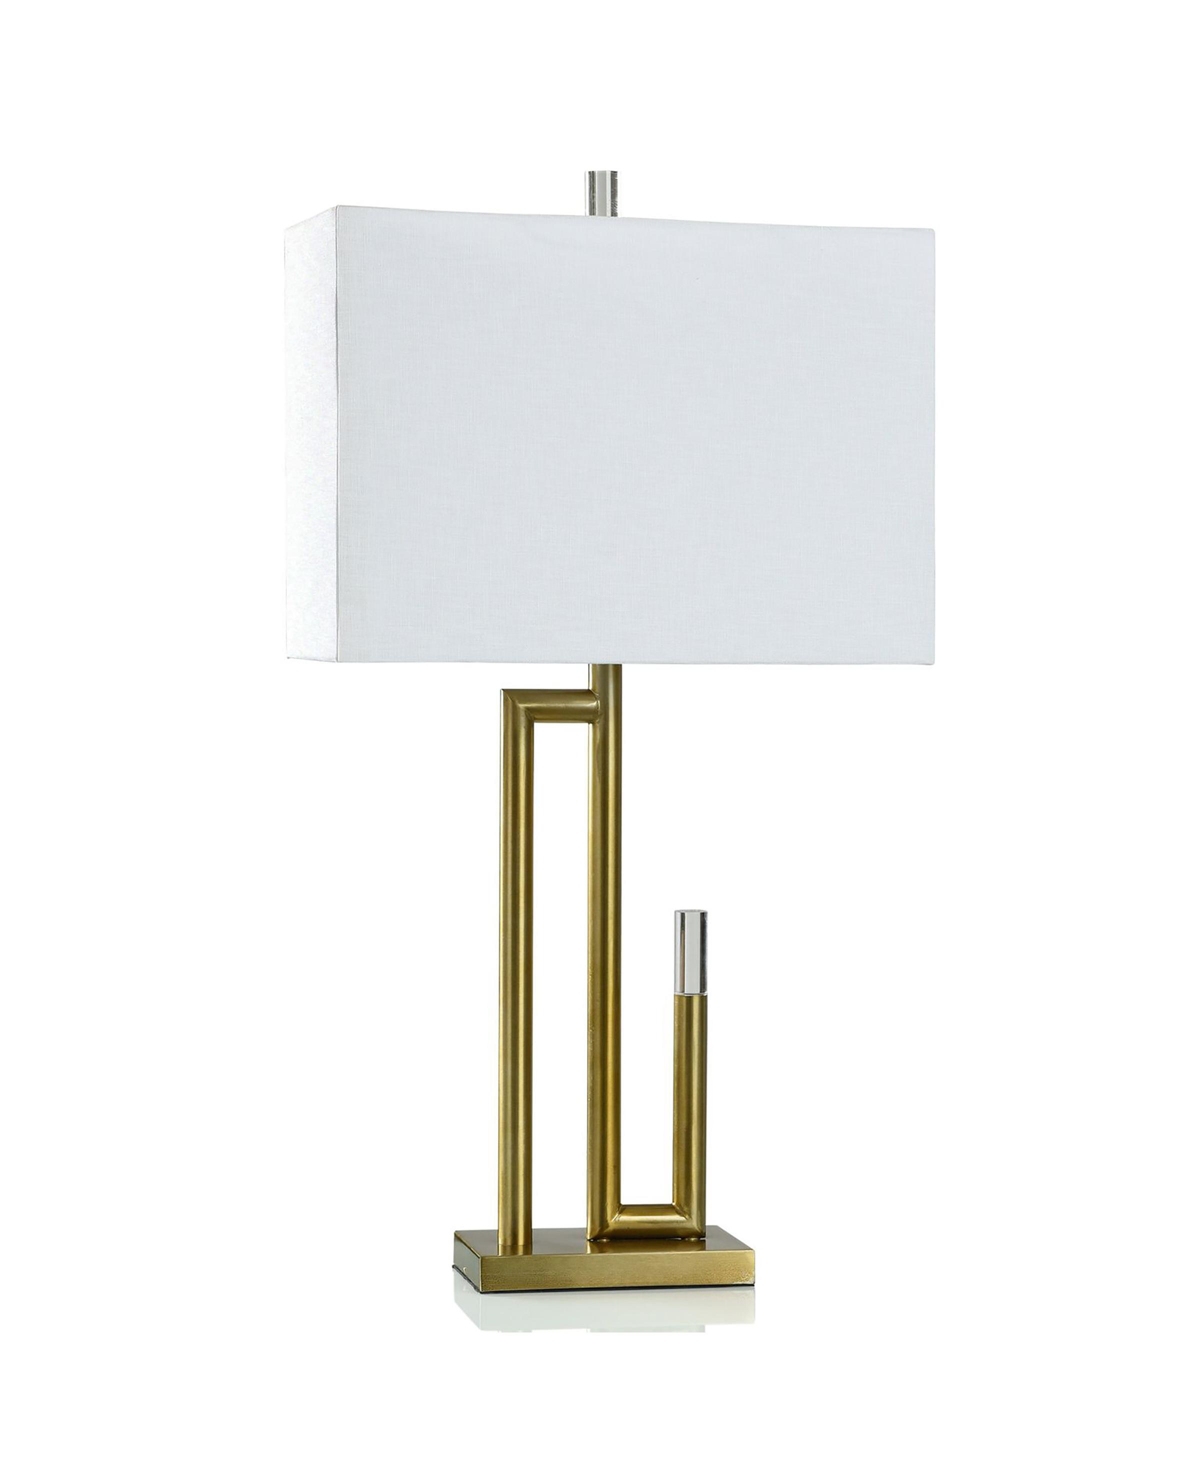 Stylecraft Home Collection 31.25" Antique-like Abstract Bar Design Table Lamp In Satin Brass,clear